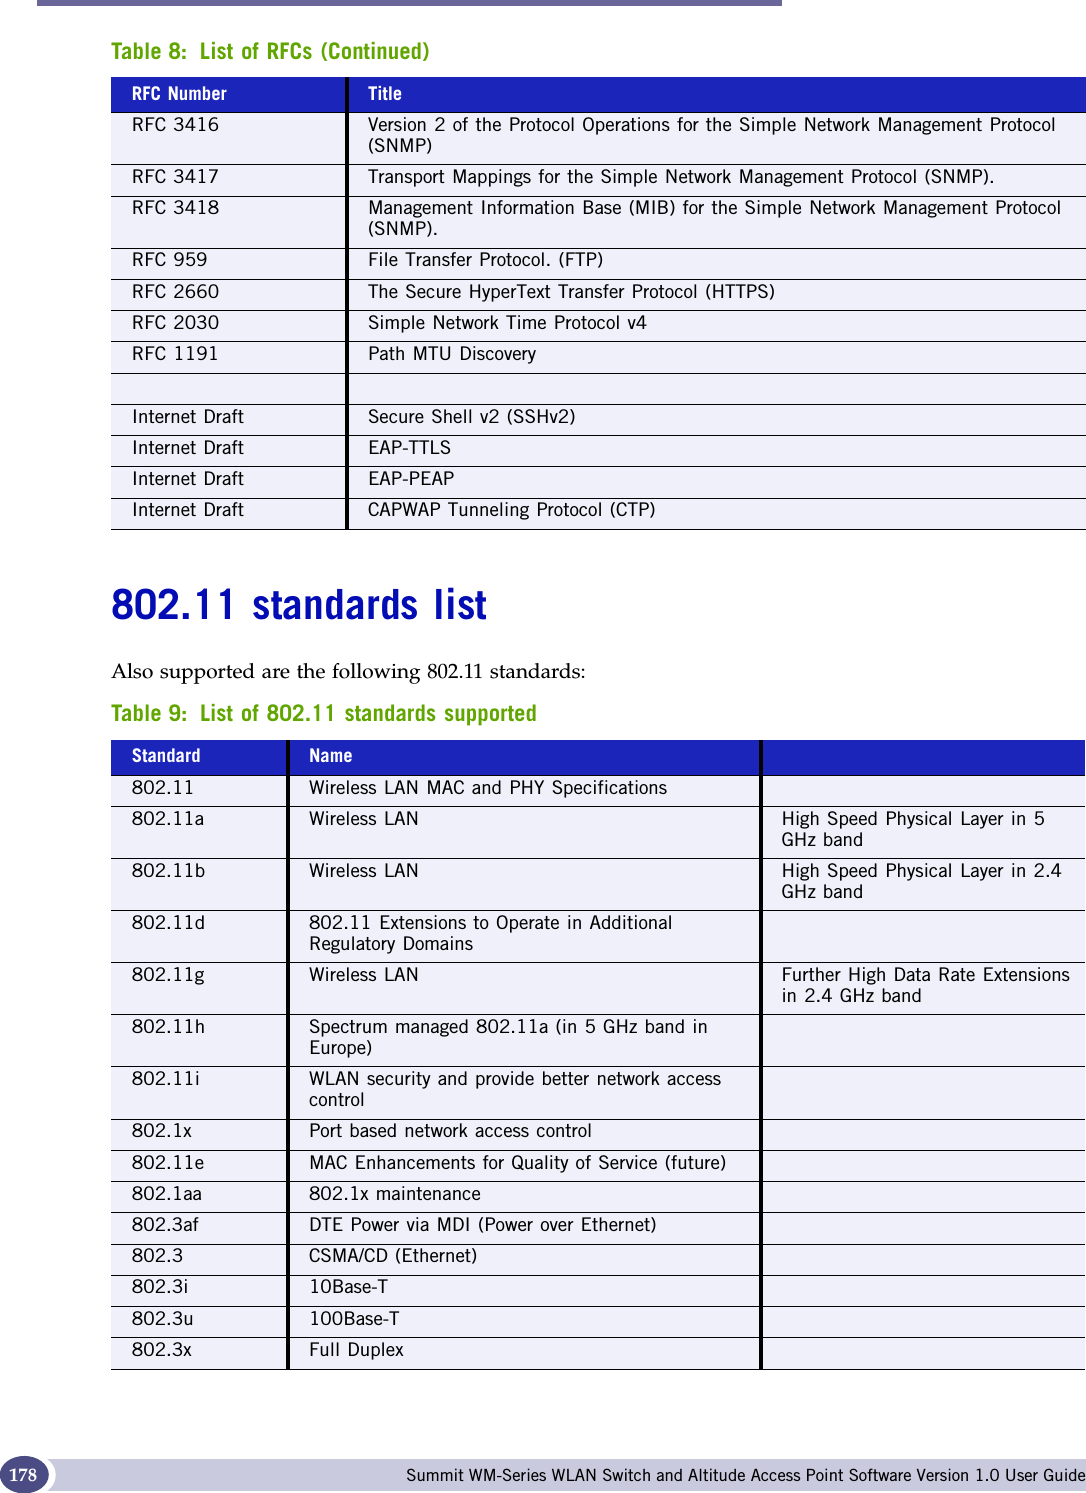 Reference lists of standards Summit WM-Series WLAN Switch and Altitude Access Point Software Version 1.0 User Guide178802.11 standards listAlso supported are the following 802.11 standards:RFC 3416 Version 2 of the Protocol Operations for the Simple Network Management Protocol (SNMP)RFC 3417 Transport Mappings for the Simple Network Management Protocol (SNMP). RFC 3418 Management Information Base (MIB) for the Simple Network Management Protocol (SNMP).RFC 959 File Transfer Protocol. (FTP)RFC 2660 The Secure HyperText Transfer Protocol (HTTPS)RFC 2030 Simple Network Time Protocol v4RFC 1191 Path MTU DiscoveryInternet Draft Secure Shell v2 (SSHv2)Internet Draft EAP-TTLSInternet Draft EAP-PEAPInternet Draft CAPWAP Tunneling Protocol (CTP)Table 9: List of 802.11 standards supportedStandard Name802.11 Wireless LAN MAC and PHY Specifications802.11a Wireless LAN High Speed Physical Layer in 5 GHz band802.11b Wireless LAN High Speed Physical Layer in 2.4 GHz band802.11d 802.11 Extensions to Operate in Additional Regulatory Domains802.11g Wireless LAN Further High Data Rate Extensions in 2.4 GHz band802.11h Spectrum managed 802.11a (in 5 GHz band in Europe)802.11i  WLAN security and provide better network access control802.1x Port based network access control802.11e MAC Enhancements for Quality of Service (future)802.1aa 802.1x maintenance802.3af DTE Power via MDI (Power over Ethernet)802.3 CSMA/CD (Ethernet)802.3i 10Base-T802.3u 100Base-T802.3x Full DuplexTable 8: List of RFCs (Continued)RFC Number Title